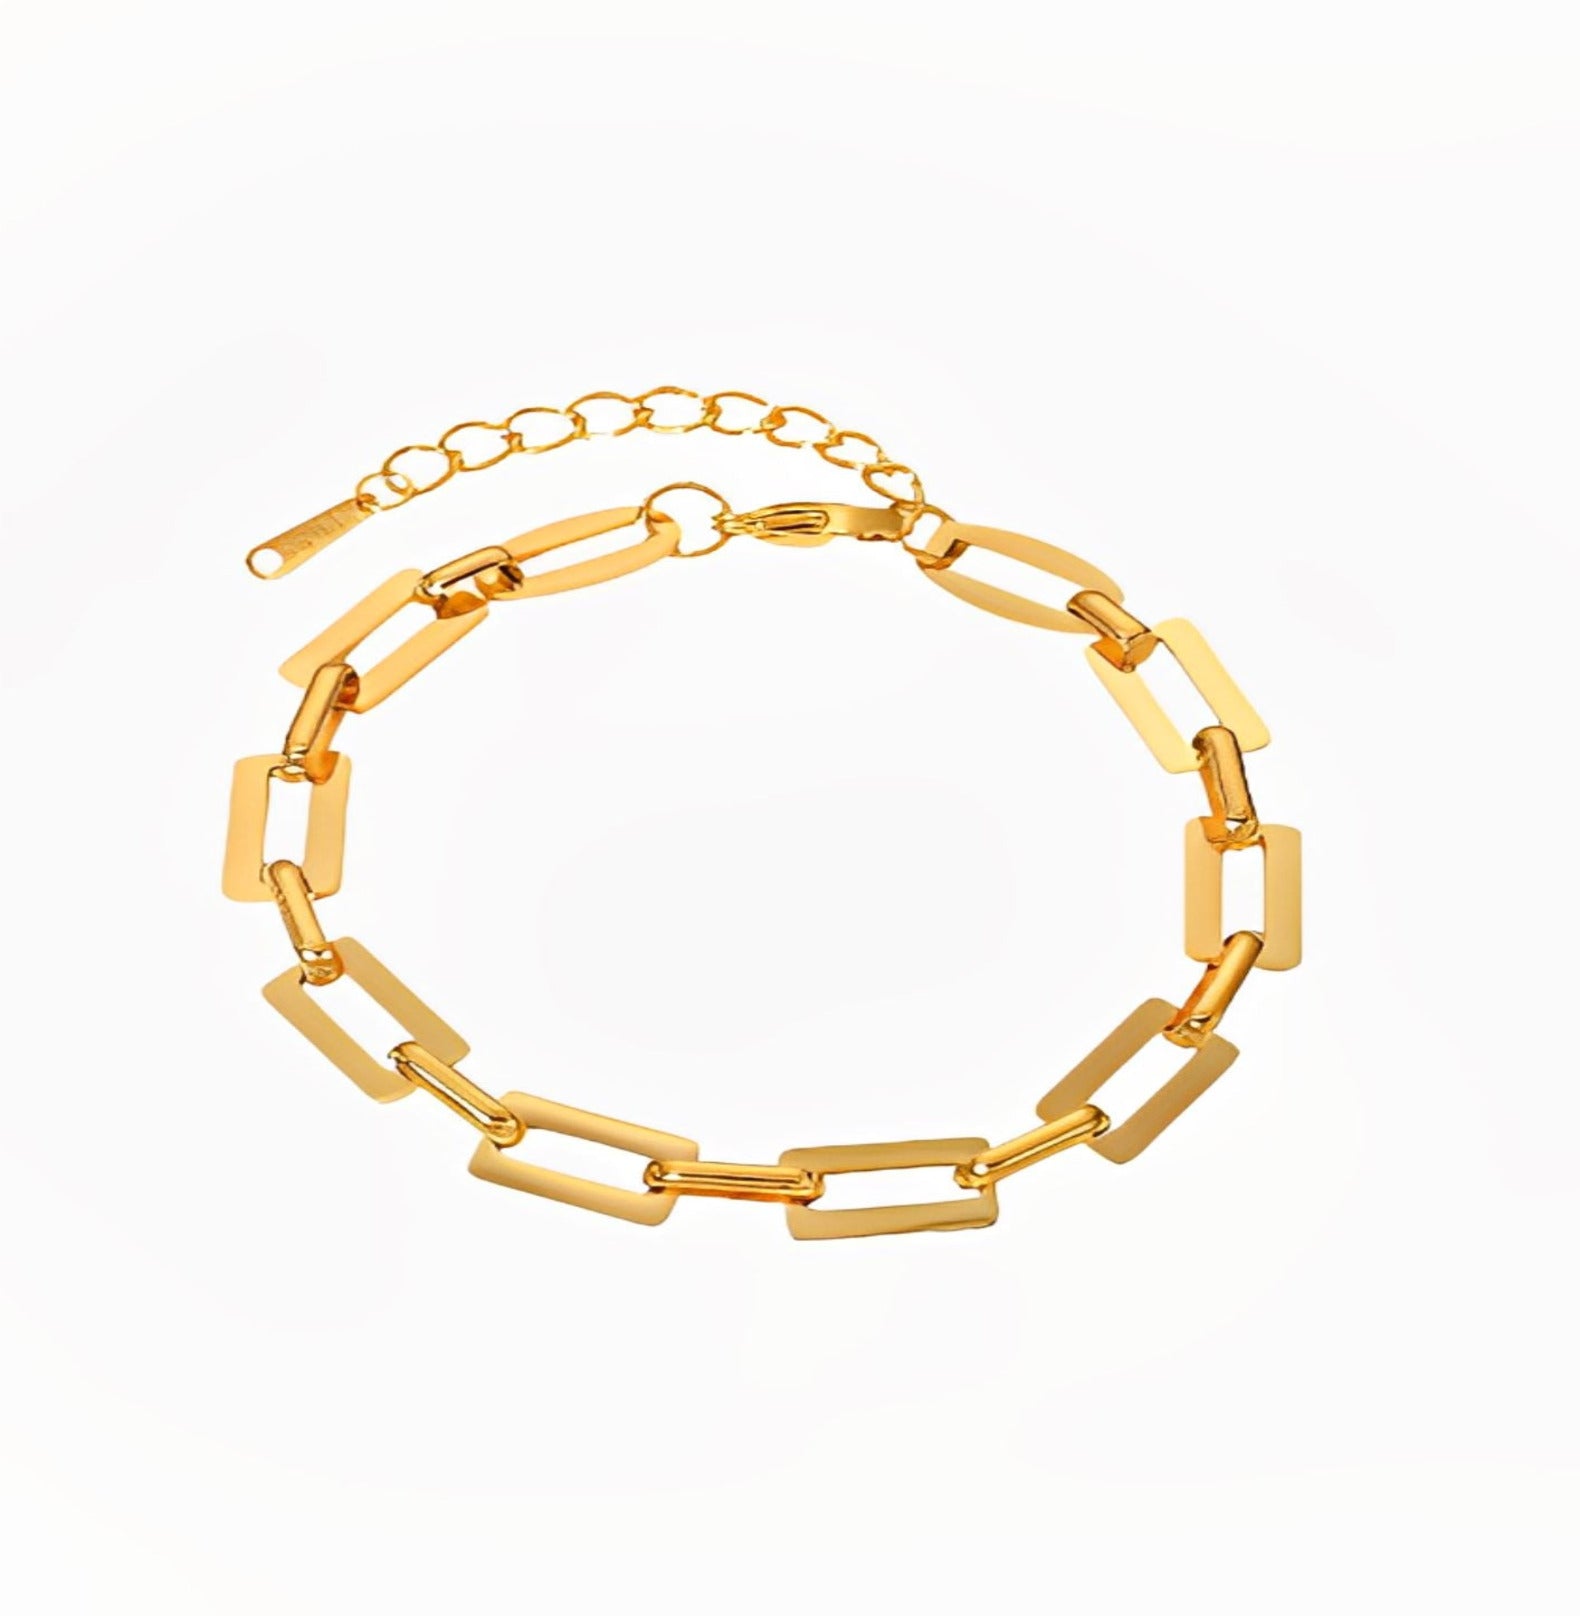 SQUARE CHAIN BRACELET braclet Yubama Jewelry Online Store - The Elegant Designs of Gold and Silver ! 